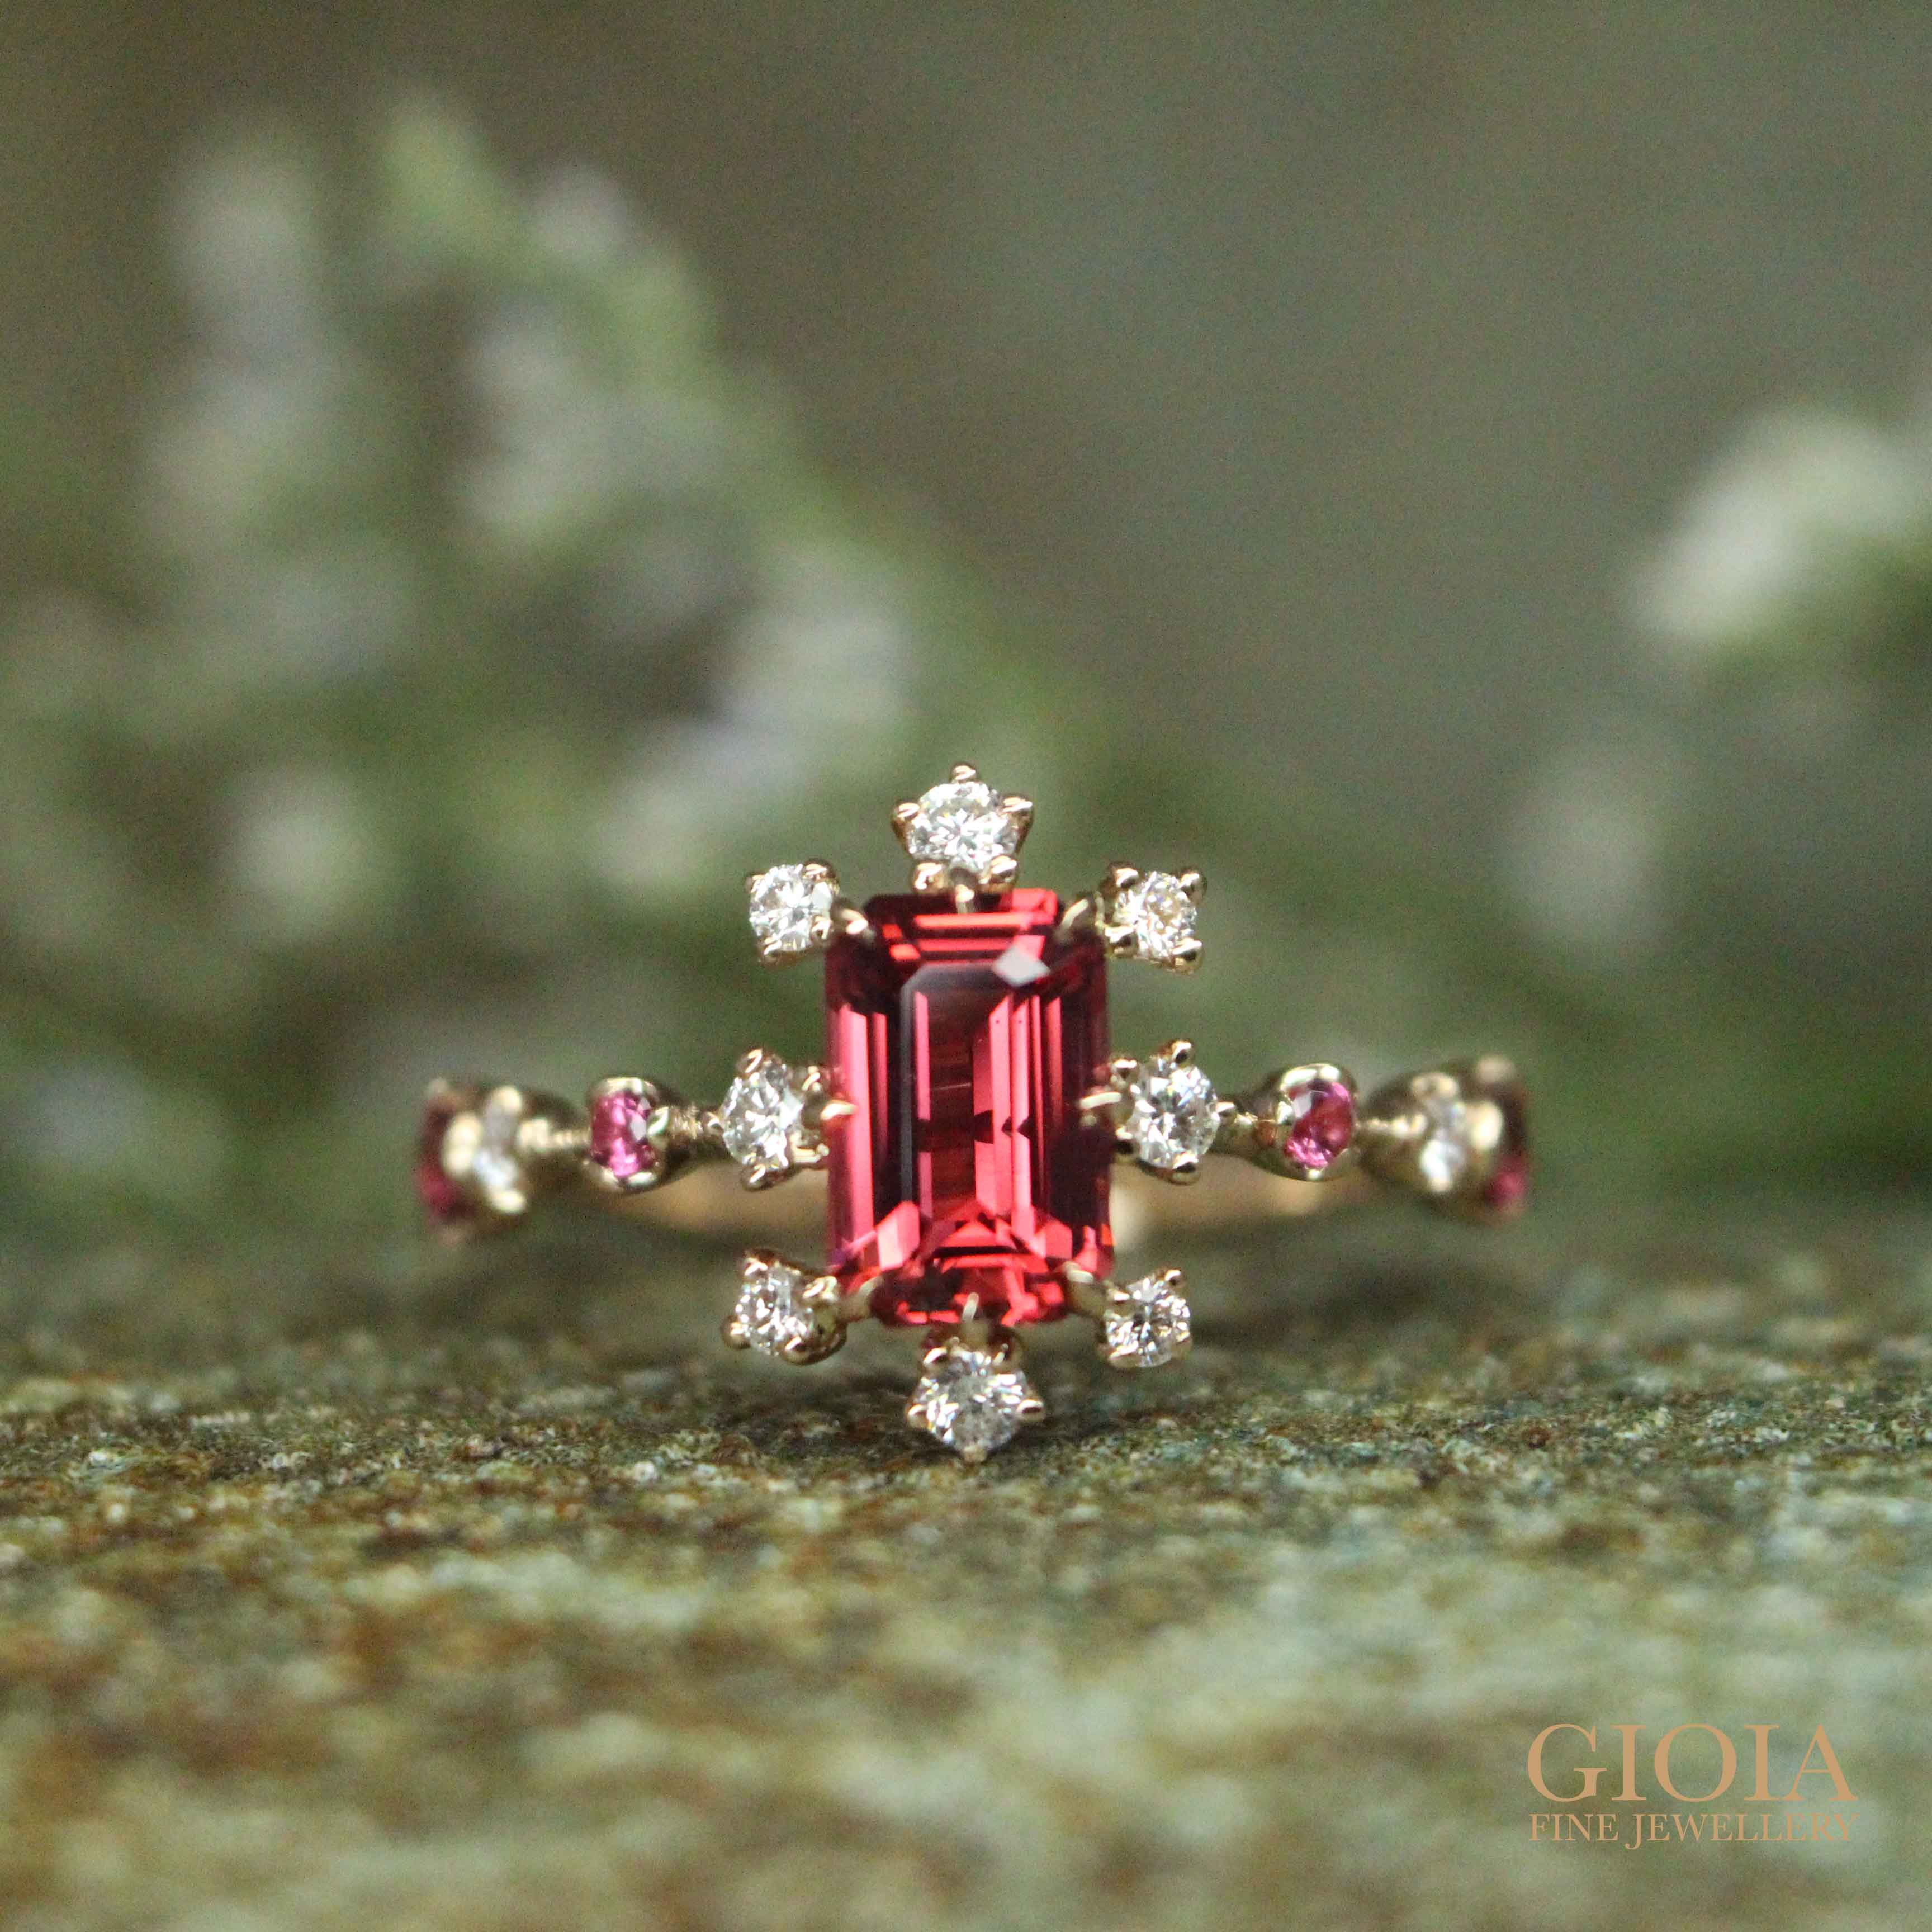 Red Spinel Engagement Ring with round brilliant diamond and spinel setting | Local Singapore Customised Jeweller